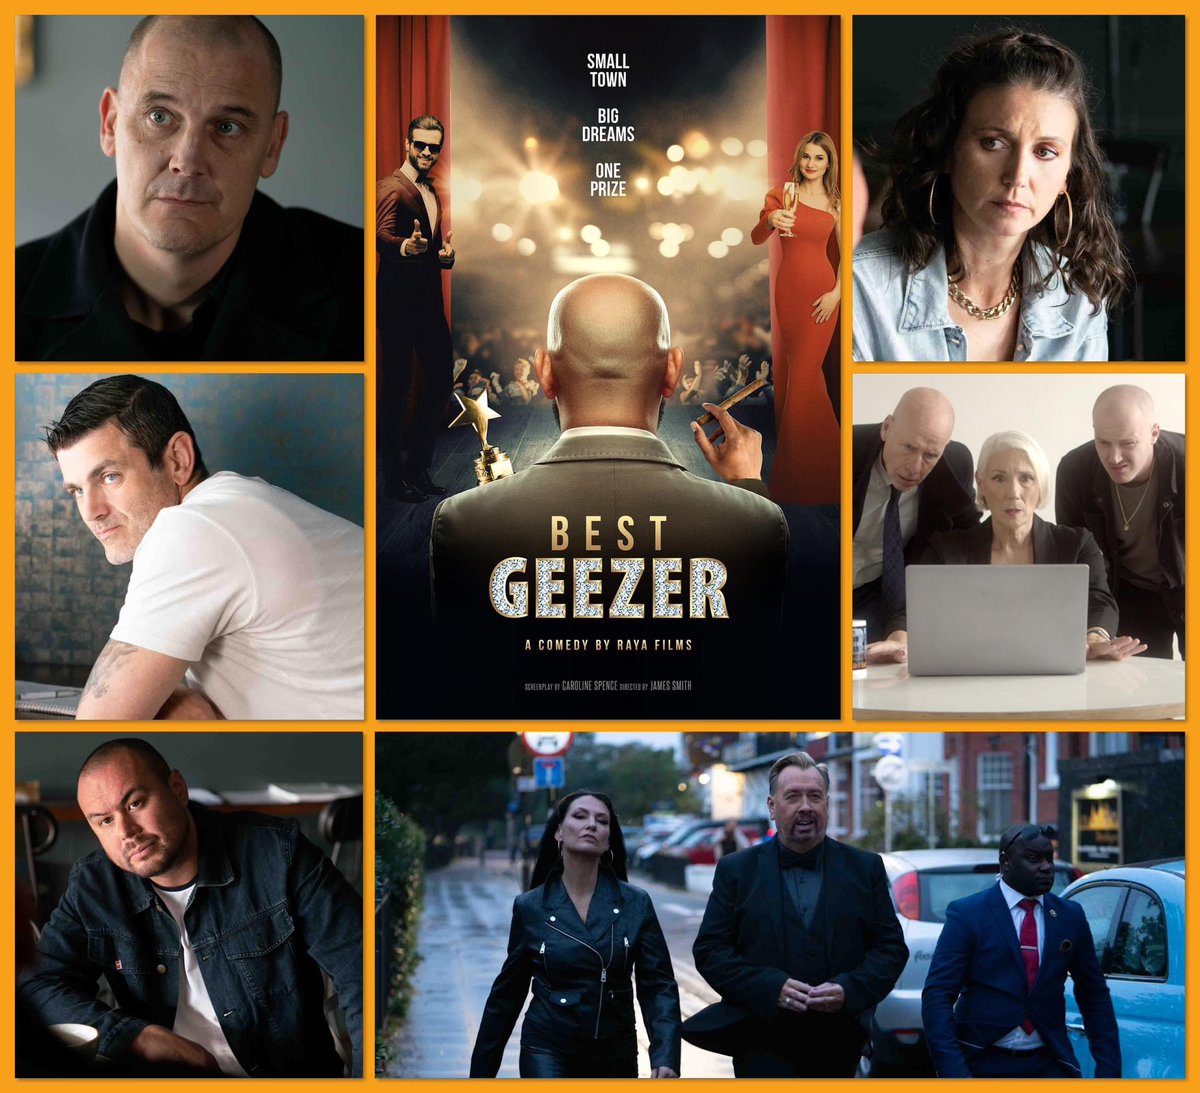 Great news & congrats to @rayafilmslondon @jsmithwriter @cspenceproducer #cast & #crew as @bestgeezer is listed on the @britishcomedyguide
comedy.co.uk/film/best-geez…